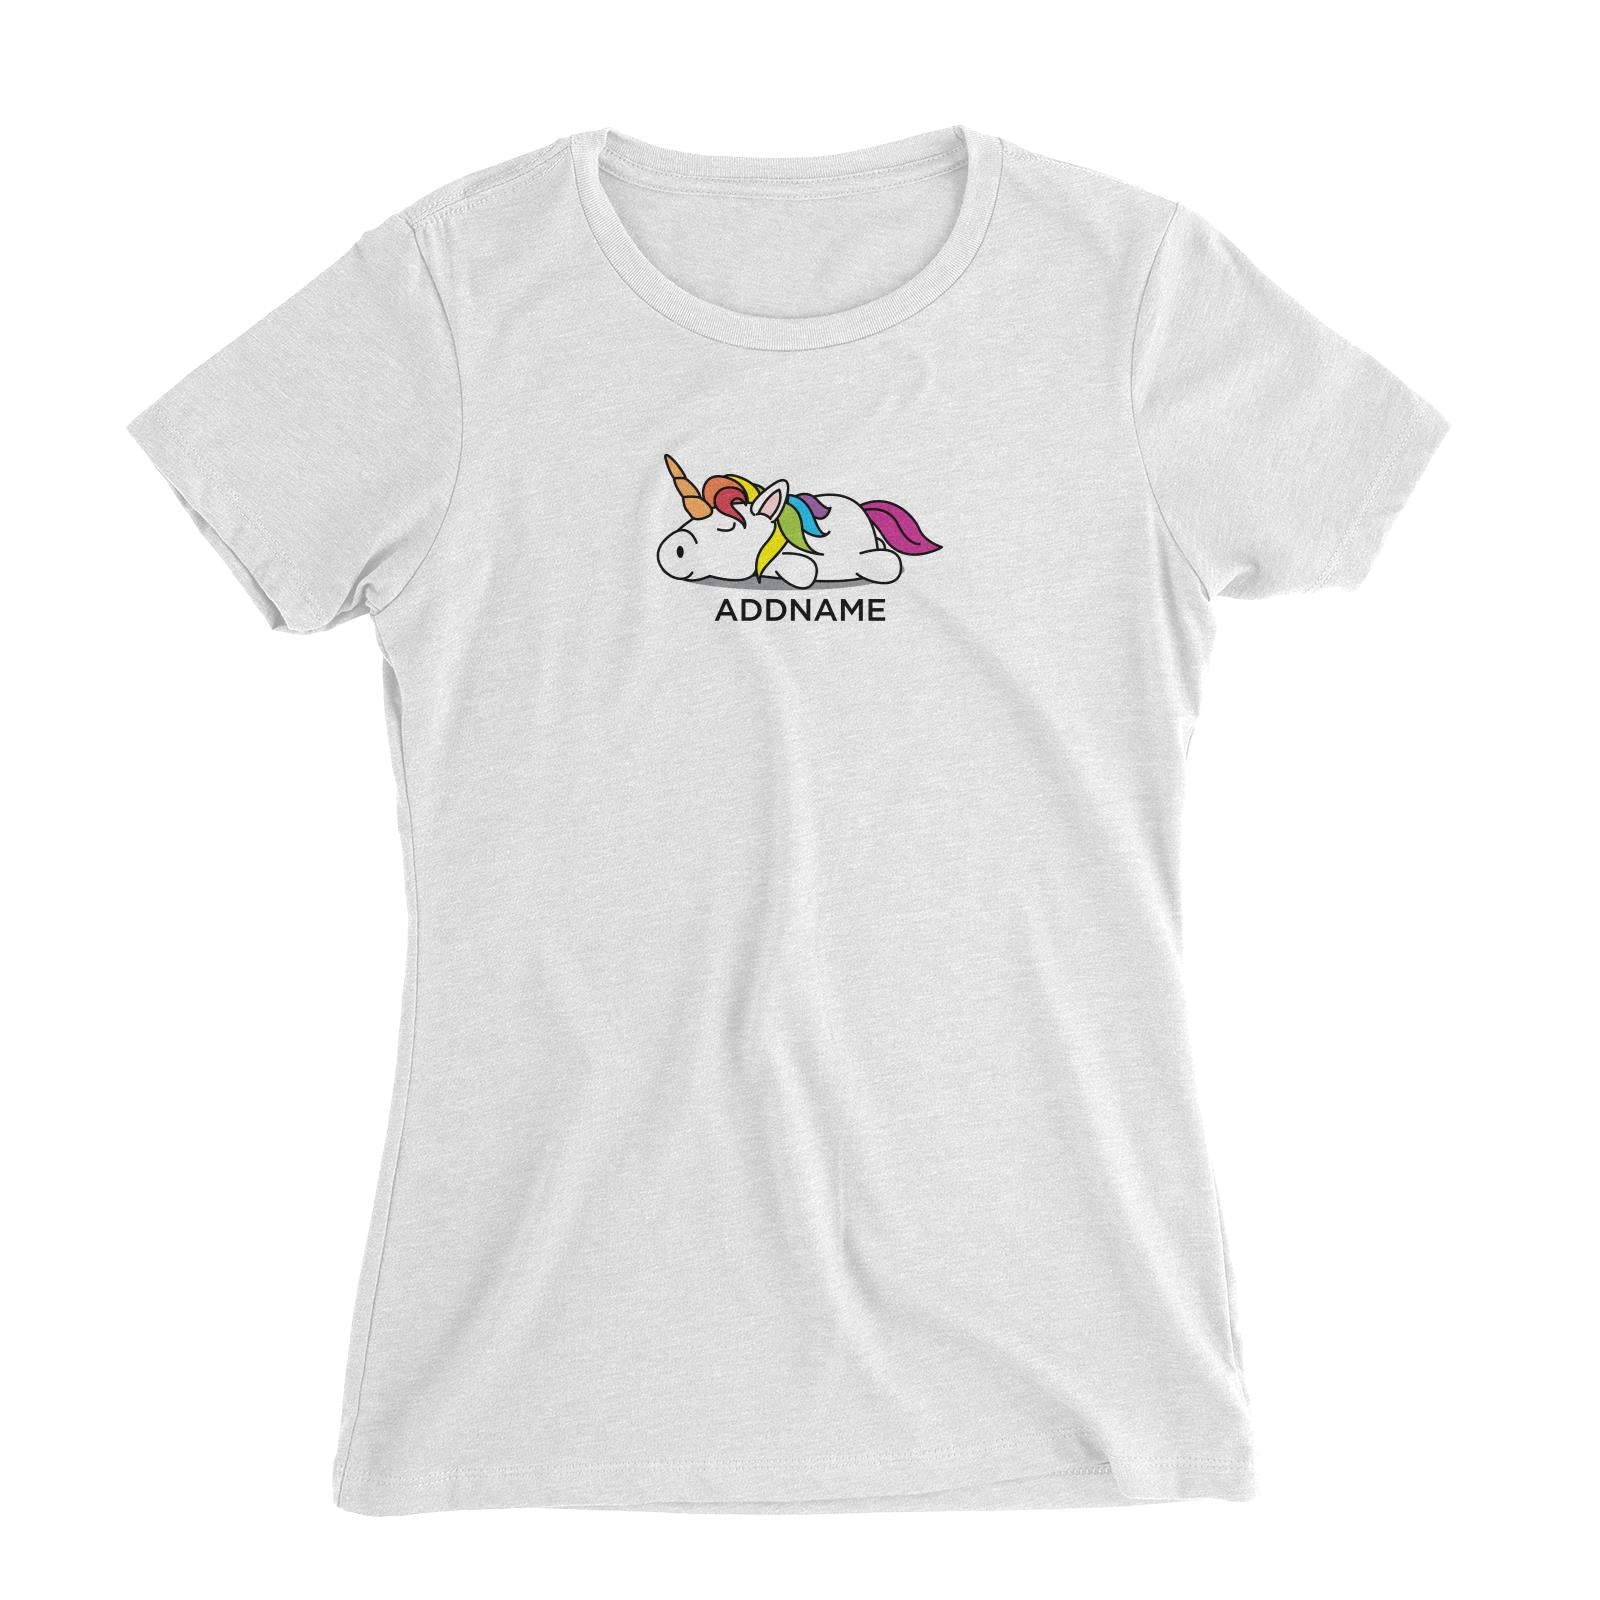 Lazy Colourful Unicorn Addname Women's Slim Fit T-Shirt  (FLASH DEAL)